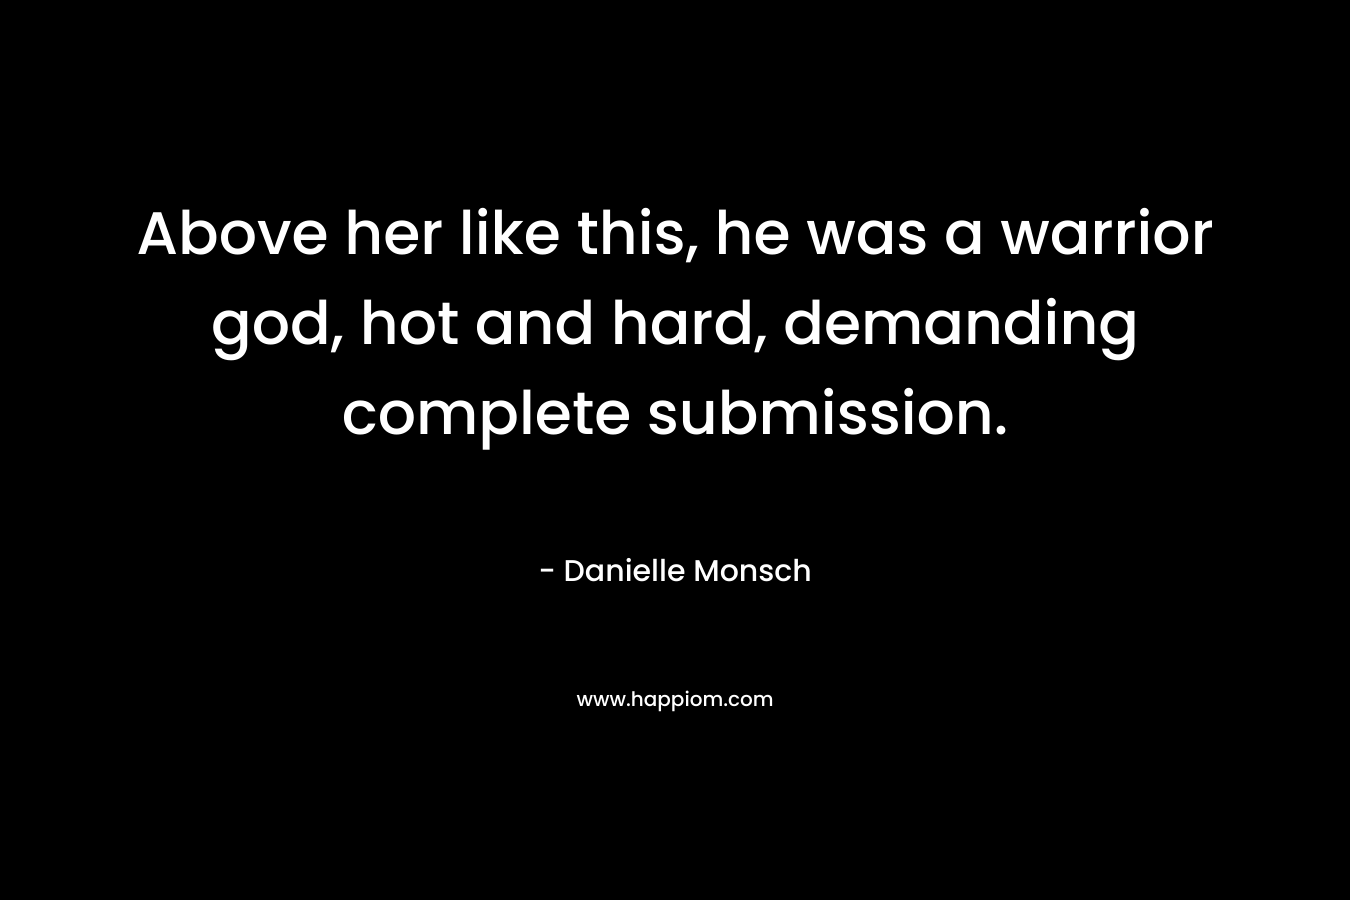 Above her like this, he was a warrior god, hot and hard, demanding complete submission. – Danielle Monsch